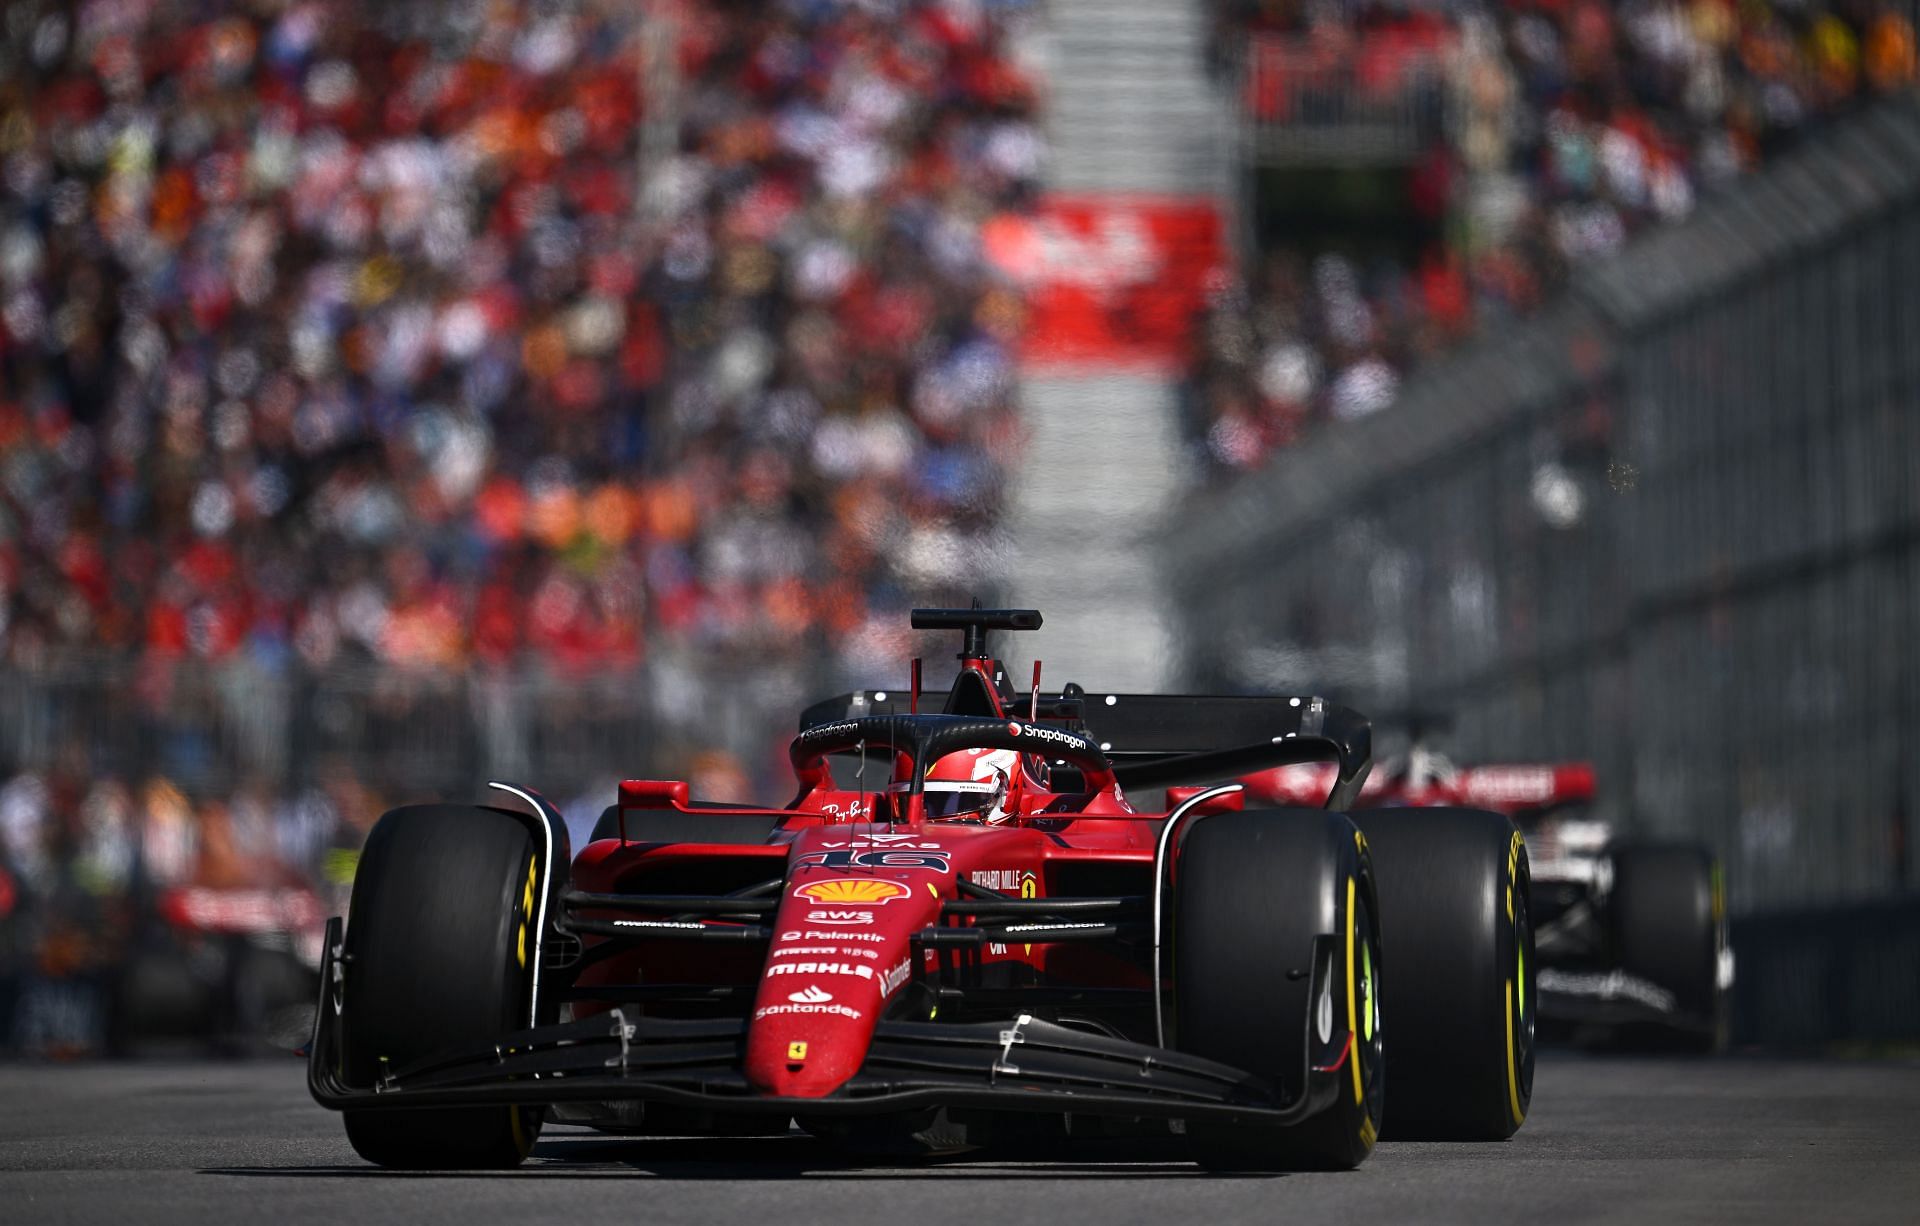 Charles Leclerc salvaged a solid P5 after starting from the back at the 2022 F1 Canadian GP